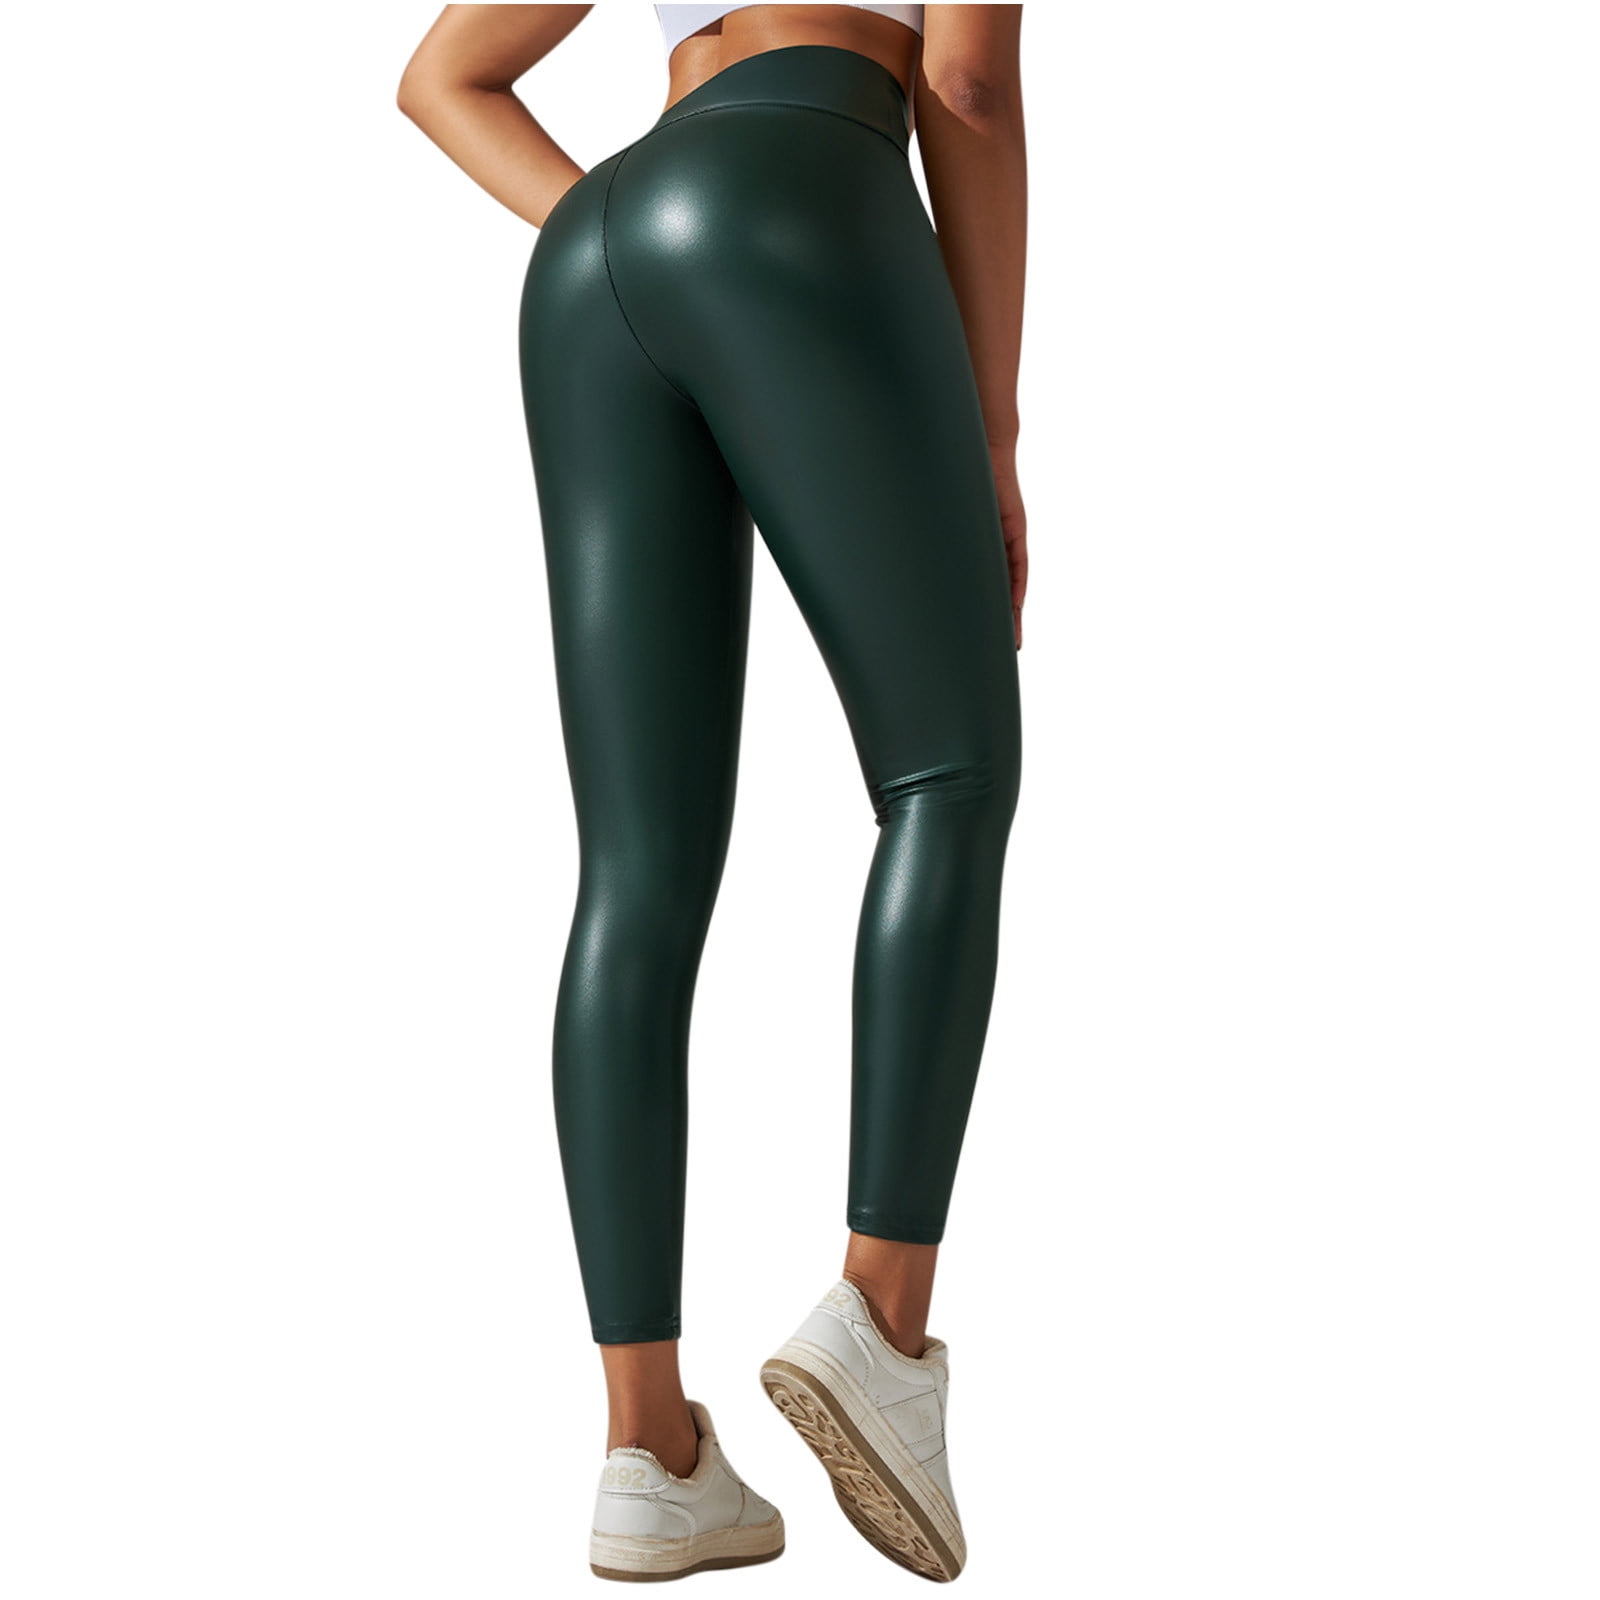 NORMOV Seamless Leather Leggings For Women Sexy, Bright Skin, Push Up,  Shiny Slim Fit Fitness Tight Yoga Pants From Luo02, $11.73